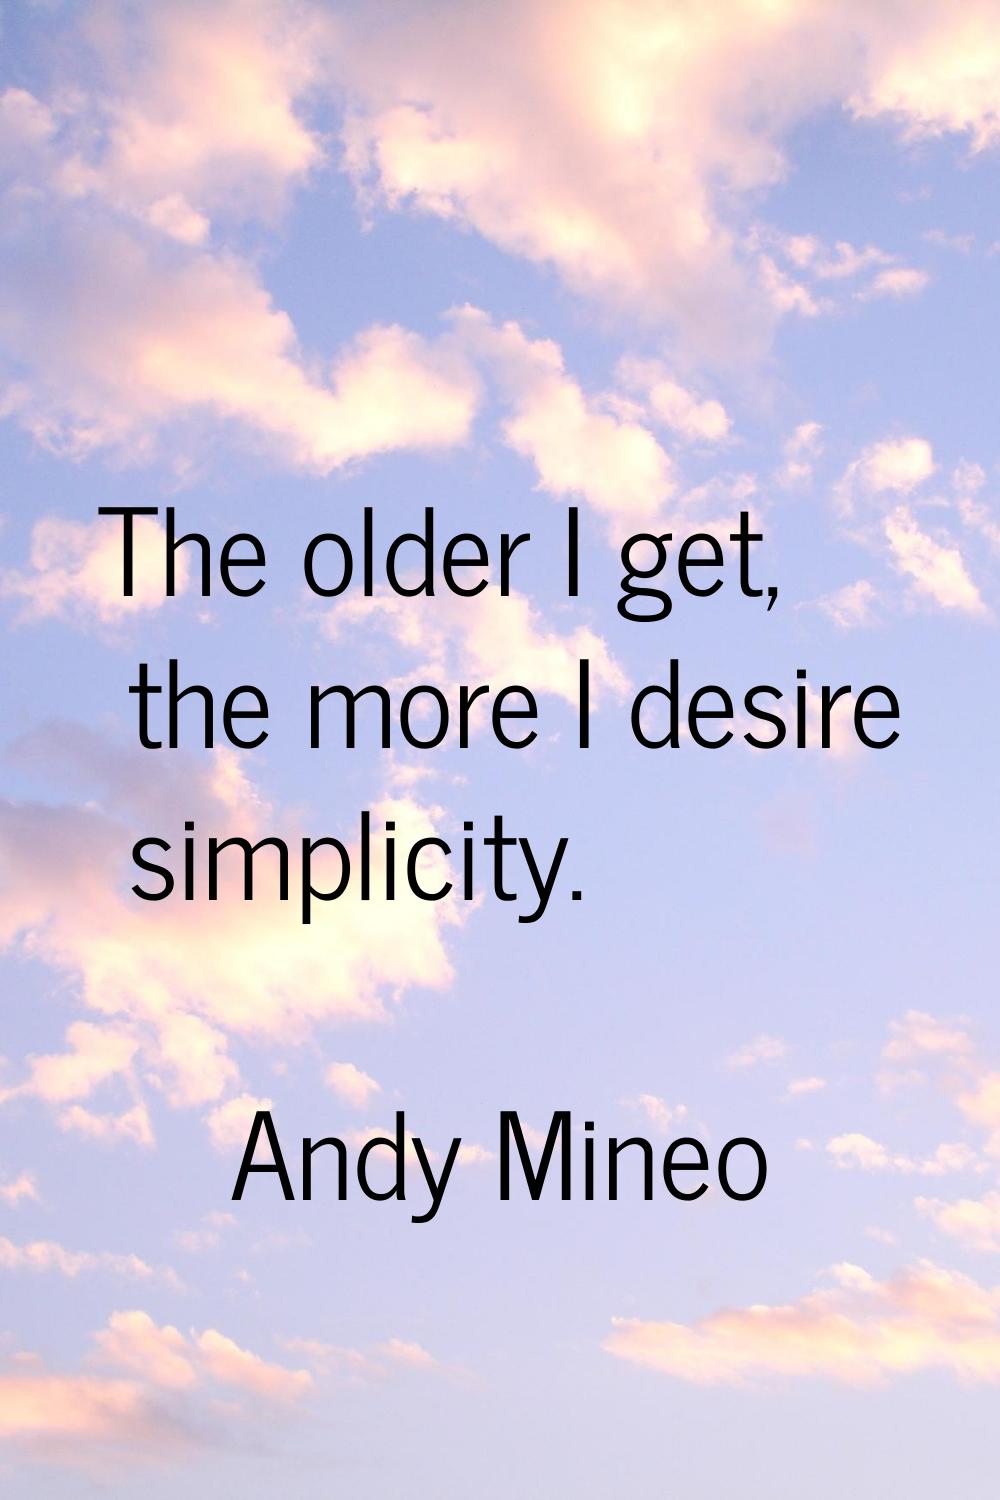 The older I get, the more I desire simplicity.